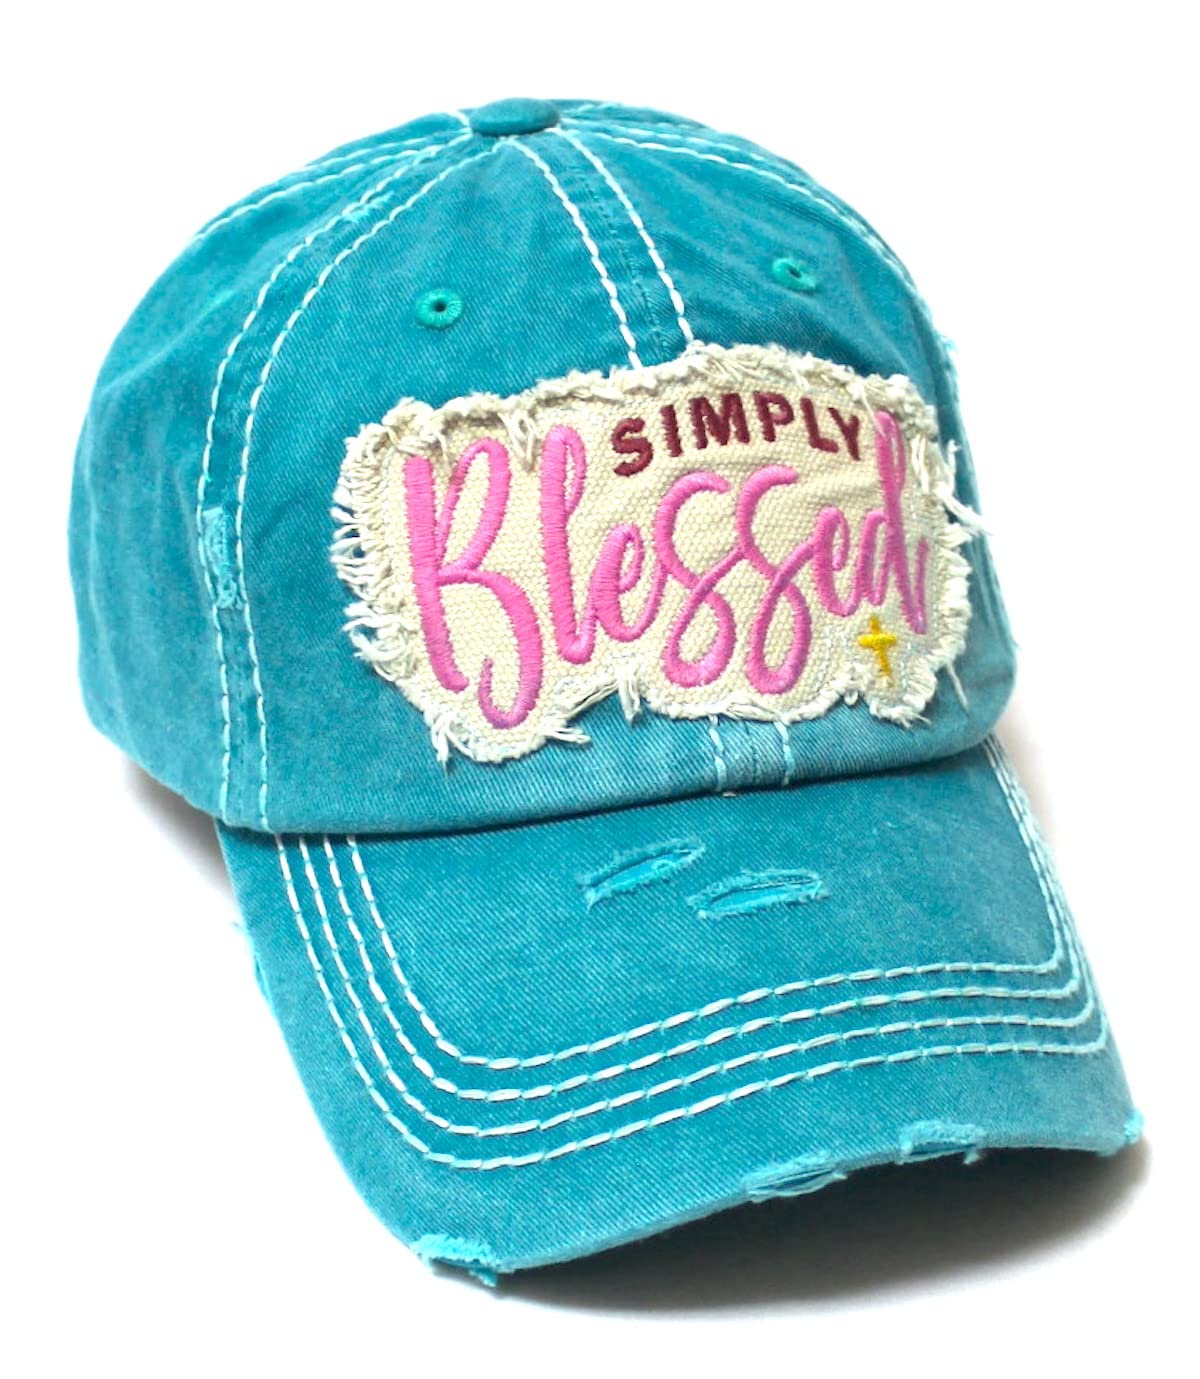 Unisex Monogram Cap Simply Blessed Cross, Faith Themed Patch Embroidery Distressed Hat